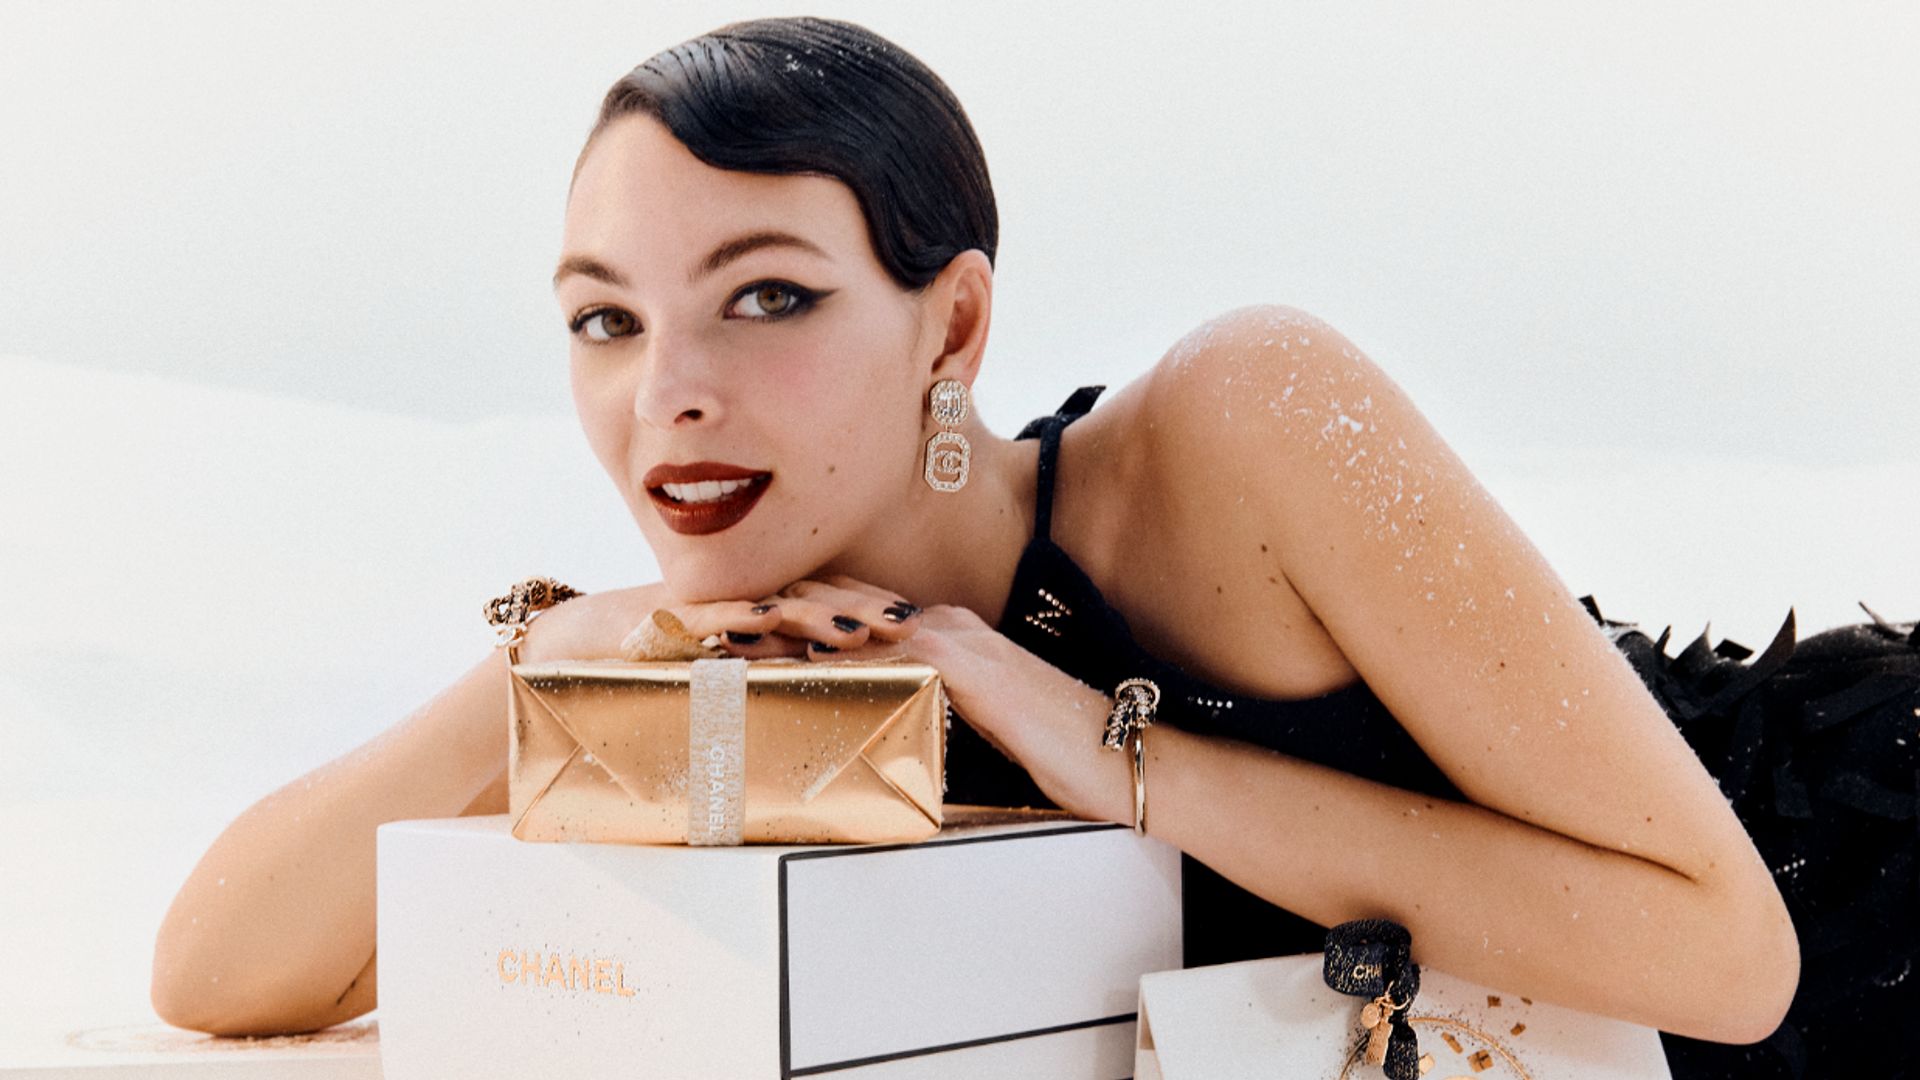 Chanel's perfume is getting a glow up for 2023: Olivier Polge